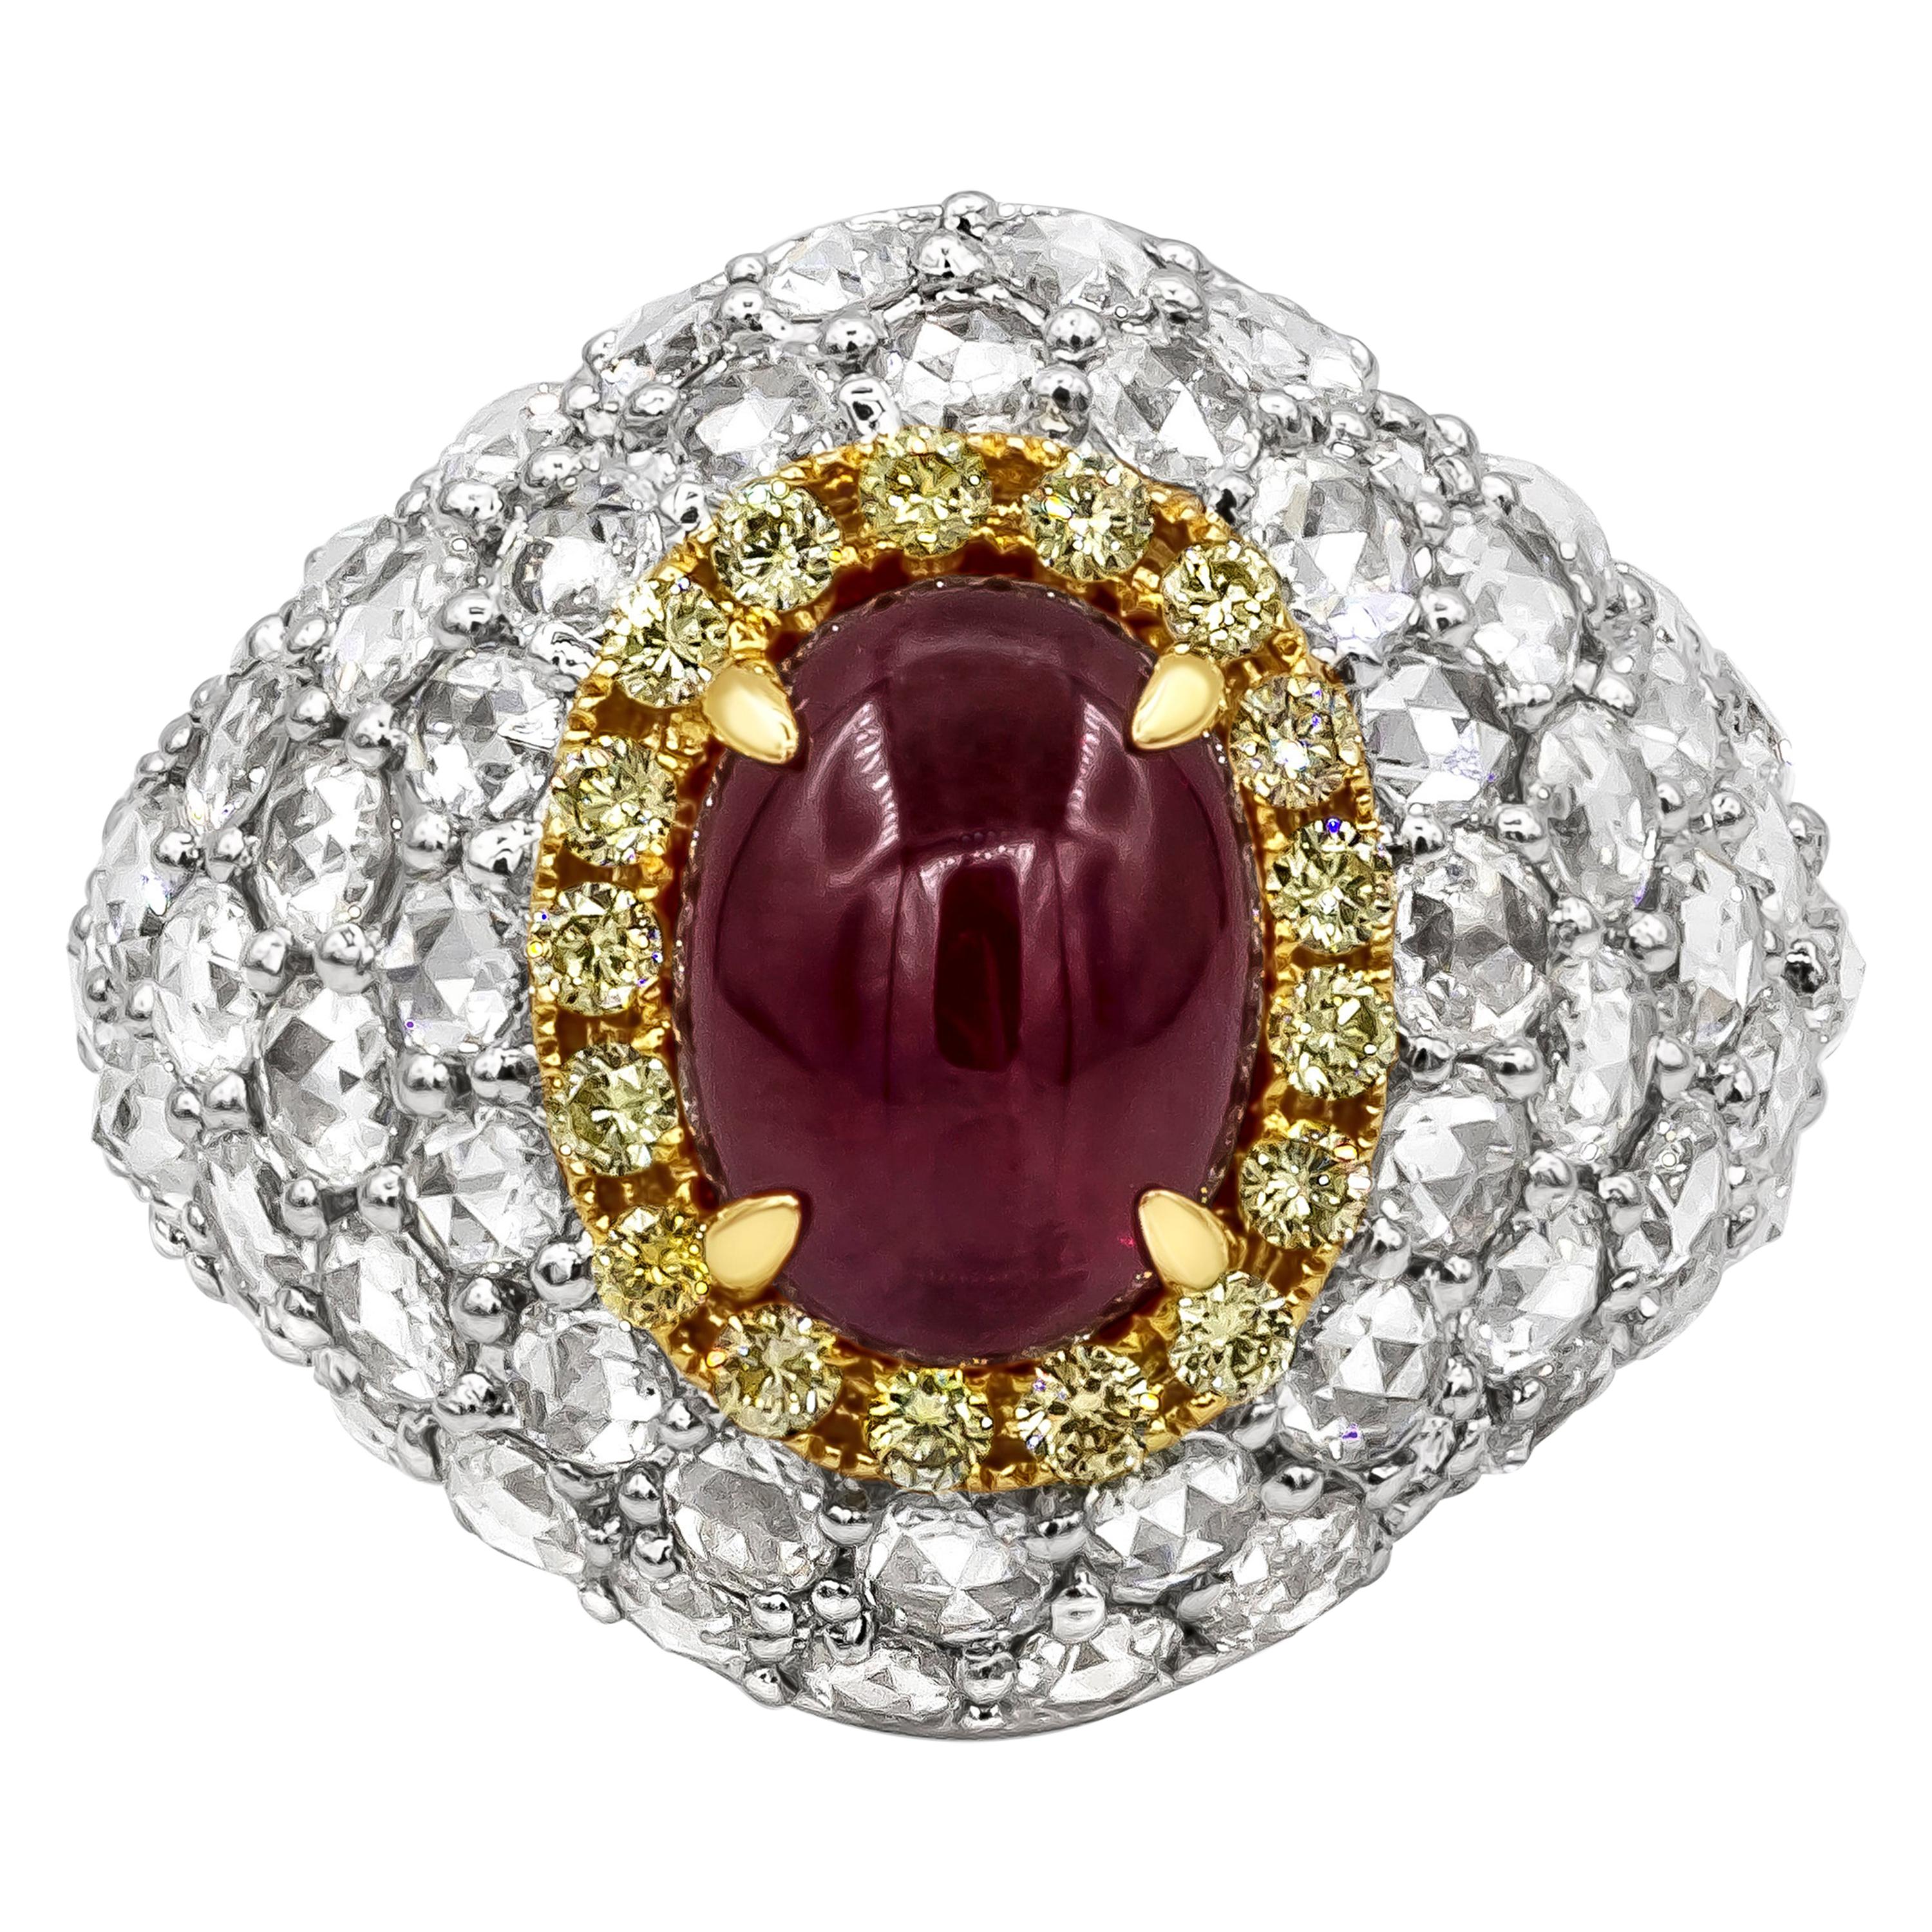 3.76 Carats Cabochon Ruby, Mixed Cut Yellow & White Diamonds Dome Cocktail Ring